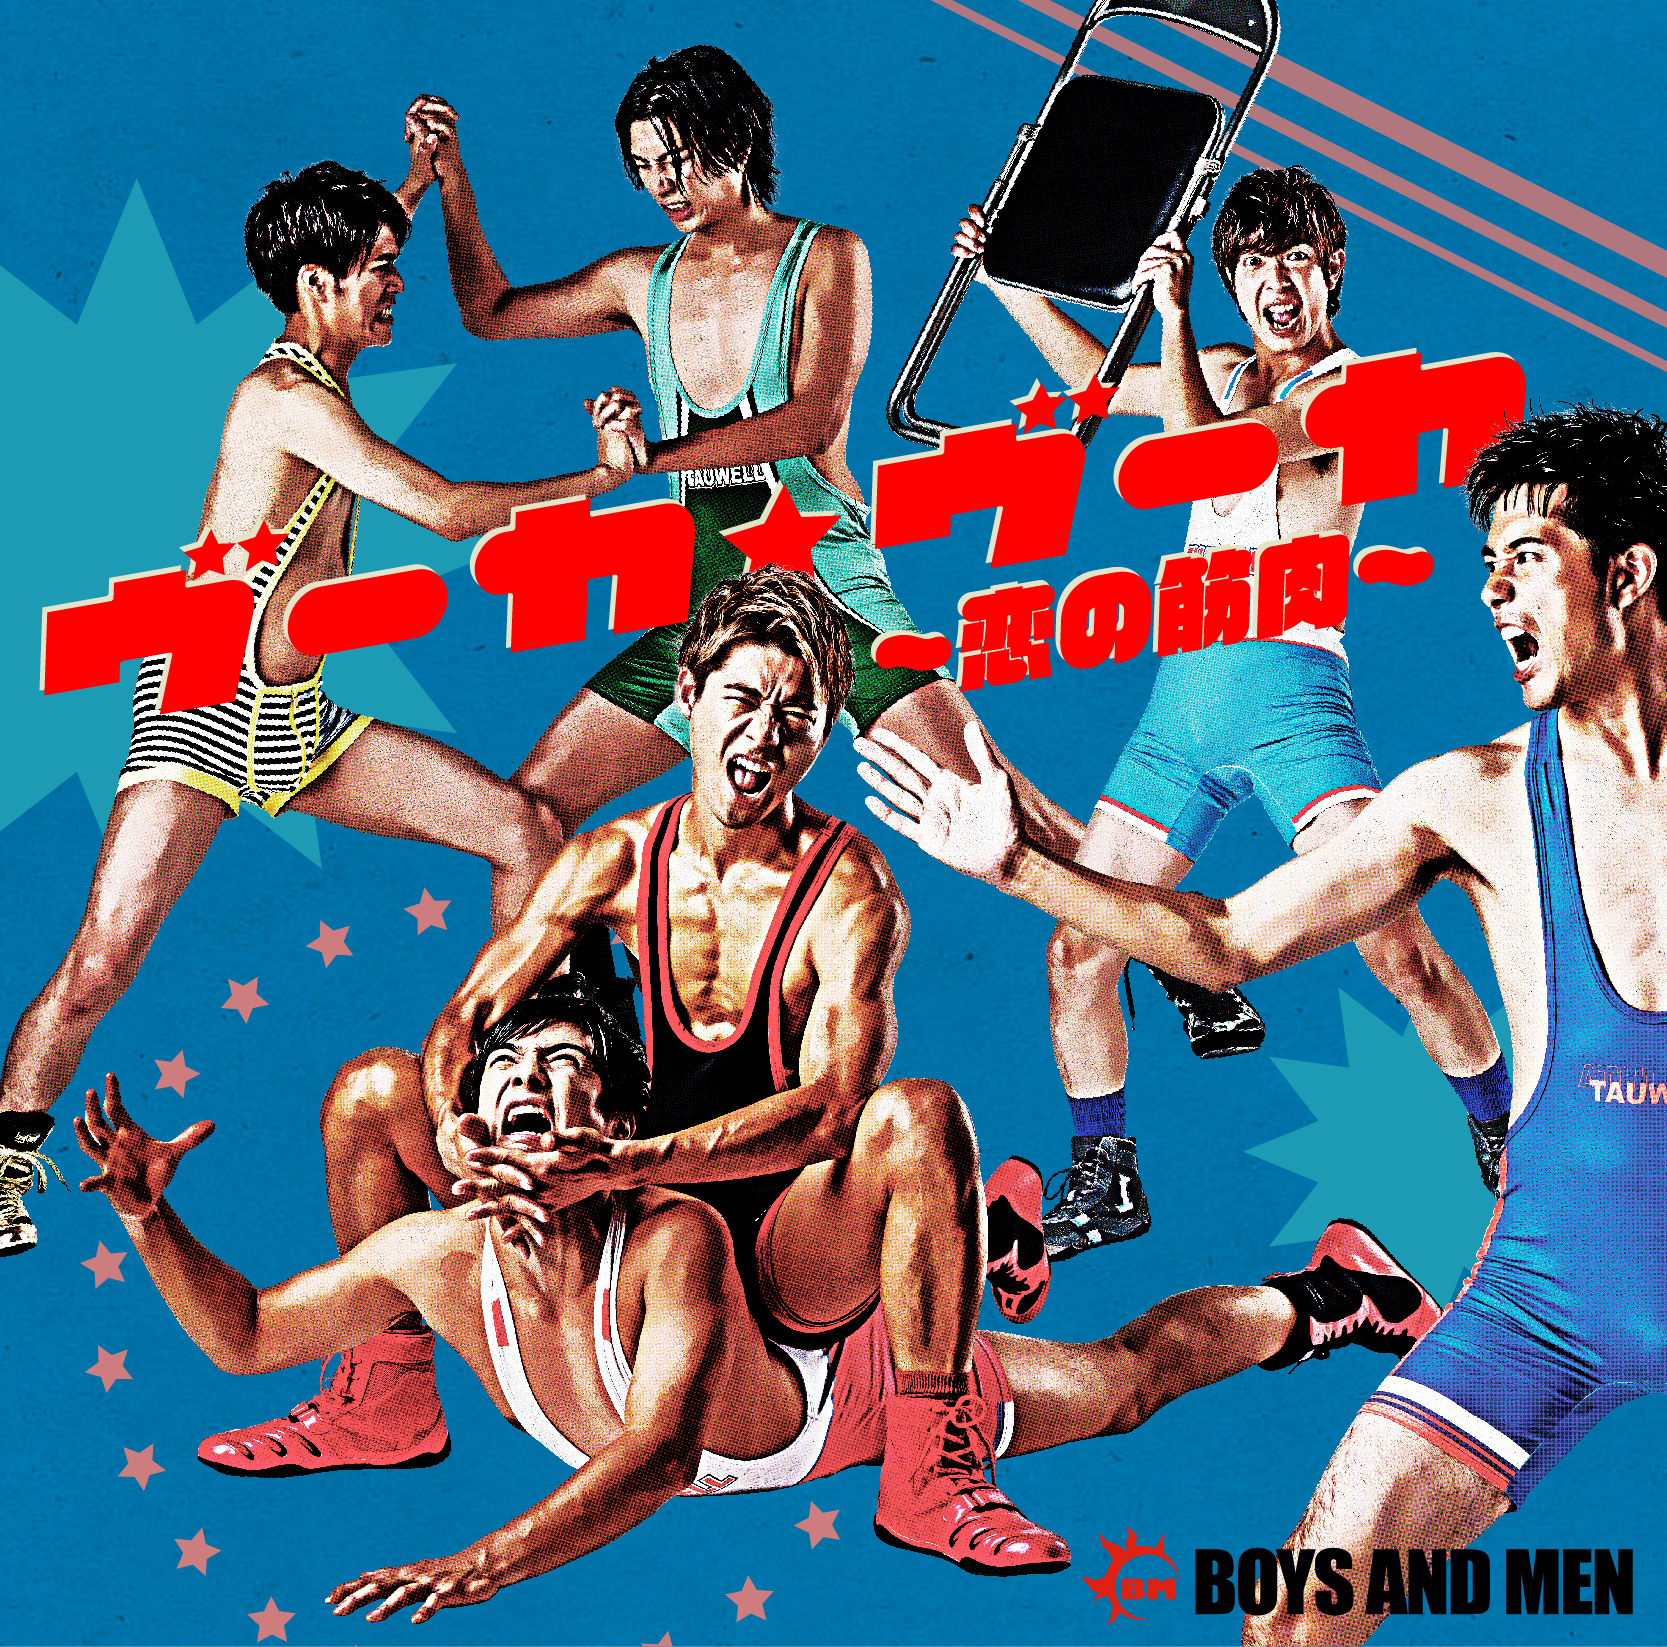 BOYS AND MEN OFFICIAL SITE